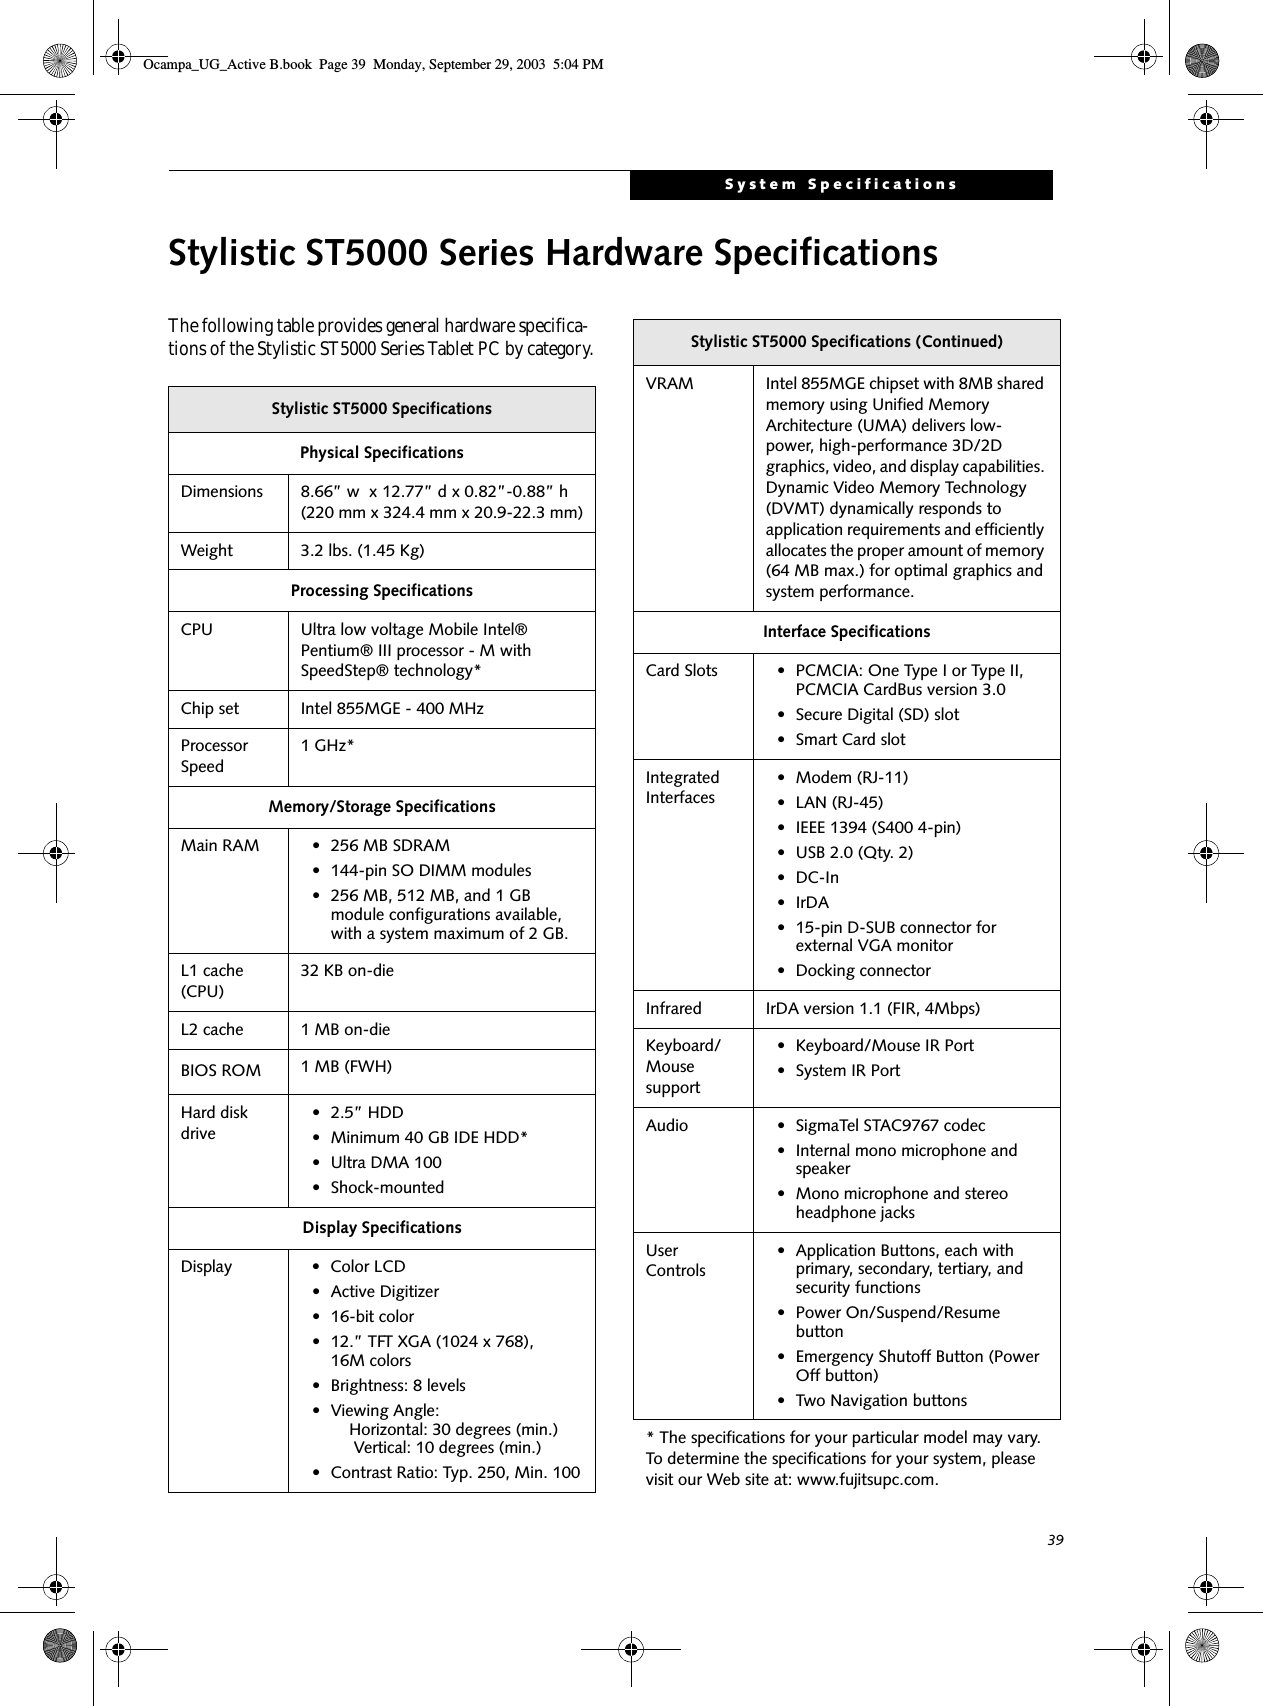 39System SpecificationsStylistic ST5000 Series Hardware SpecificationsThe following table provides general hardware specifica-tions of the Stylistic ST5000 Series Tablet PC by category.Stylistic ST5000 SpecificationsPhysical SpecificationsDimensions 8.66” w  x 12.77” d x 0.82”-0.88” h (220 mm x 324.4 mm x 20.9-22.3 mm)Weight 3.2 lbs. (1.45 Kg)Processing SpecificationsCPU Ultra low voltage Mobile Intel® Pentium® III processor - M with SpeedStep® technology*Chip set Intel 855MGE - 400 MHzProcessor Speed1 GHz*Memory/Storage SpecificationsMain RAM • 256 MB SDRAM • 144-pin SO DIMM modules• 256 MB, 512 MB, and 1 GB module configurations available, with a system maximum of 2 GB.L1 cache (CPU)32 KB on-die L2 cache 1 MB on-die BIOS ROM 1 MB (FWH)Hard disk drive• 2.5” HDD• Minimum 40 GB IDE HDD*• Ultra DMA 100• Shock-mountedDisplay SpecificationsDisplay • Color LCD• Active Digitizer• 16-bit color• 12.” TFT XGA (1024 x 768), 16M colors• Brightness: 8 levels• Viewing Angle:    Horizontal: 30 degrees (min.)     Vertical: 10 degrees (min.)• Contrast Ratio: Typ. 250, Min. 100VRAM Intel 855MGE chipset with 8MB shared memory using Unified Memory Architecture (UMA) delivers low-power, high-performance 3D/2D graphics, video, and display capabilities. Dynamic Video Memory Technology (DVMT) dynamically responds to application requirements and efficiently allocates the proper amount of memory (64 MB max.) for optimal graphics and system performance. Interface SpecificationsCard Slots • PCMCIA: One Type I or Type II, PCMCIA CardBus version 3.0• Secure Digital (SD) slot• Smart Card slotIntegrated Interfaces• Modem (RJ-11)• LAN (RJ-45)• IEEE 1394 (S400 4-pin)• USB 2.0 (Qty. 2)•DC-In•IrDA• 15-pin D-SUB connector for external VGA monitor• Docking connectorInfrared IrDA version 1.1 (FIR, 4Mbps)Keyboard/Mouse support• Keyboard/Mouse IR Port• System IR PortAudio • SigmaTel STAC9767 codec• Internal mono microphone and speaker• Mono microphone and stereo headphone jacksUser Controls• Application Buttons, each with primary, secondary, tertiary, and security functions • Power On/Suspend/Resume button• Emergency Shutoff Button (Power Off button)• Two Navigation buttons* The specifications for your particular model may vary. To determine the specifications for your system, please visit our Web site at: www.fujitsupc.com.Stylistic ST5000 Specifications (Continued)Ocampa_UG_Active B.book  Page 39  Monday, September 29, 2003  5:04 PM